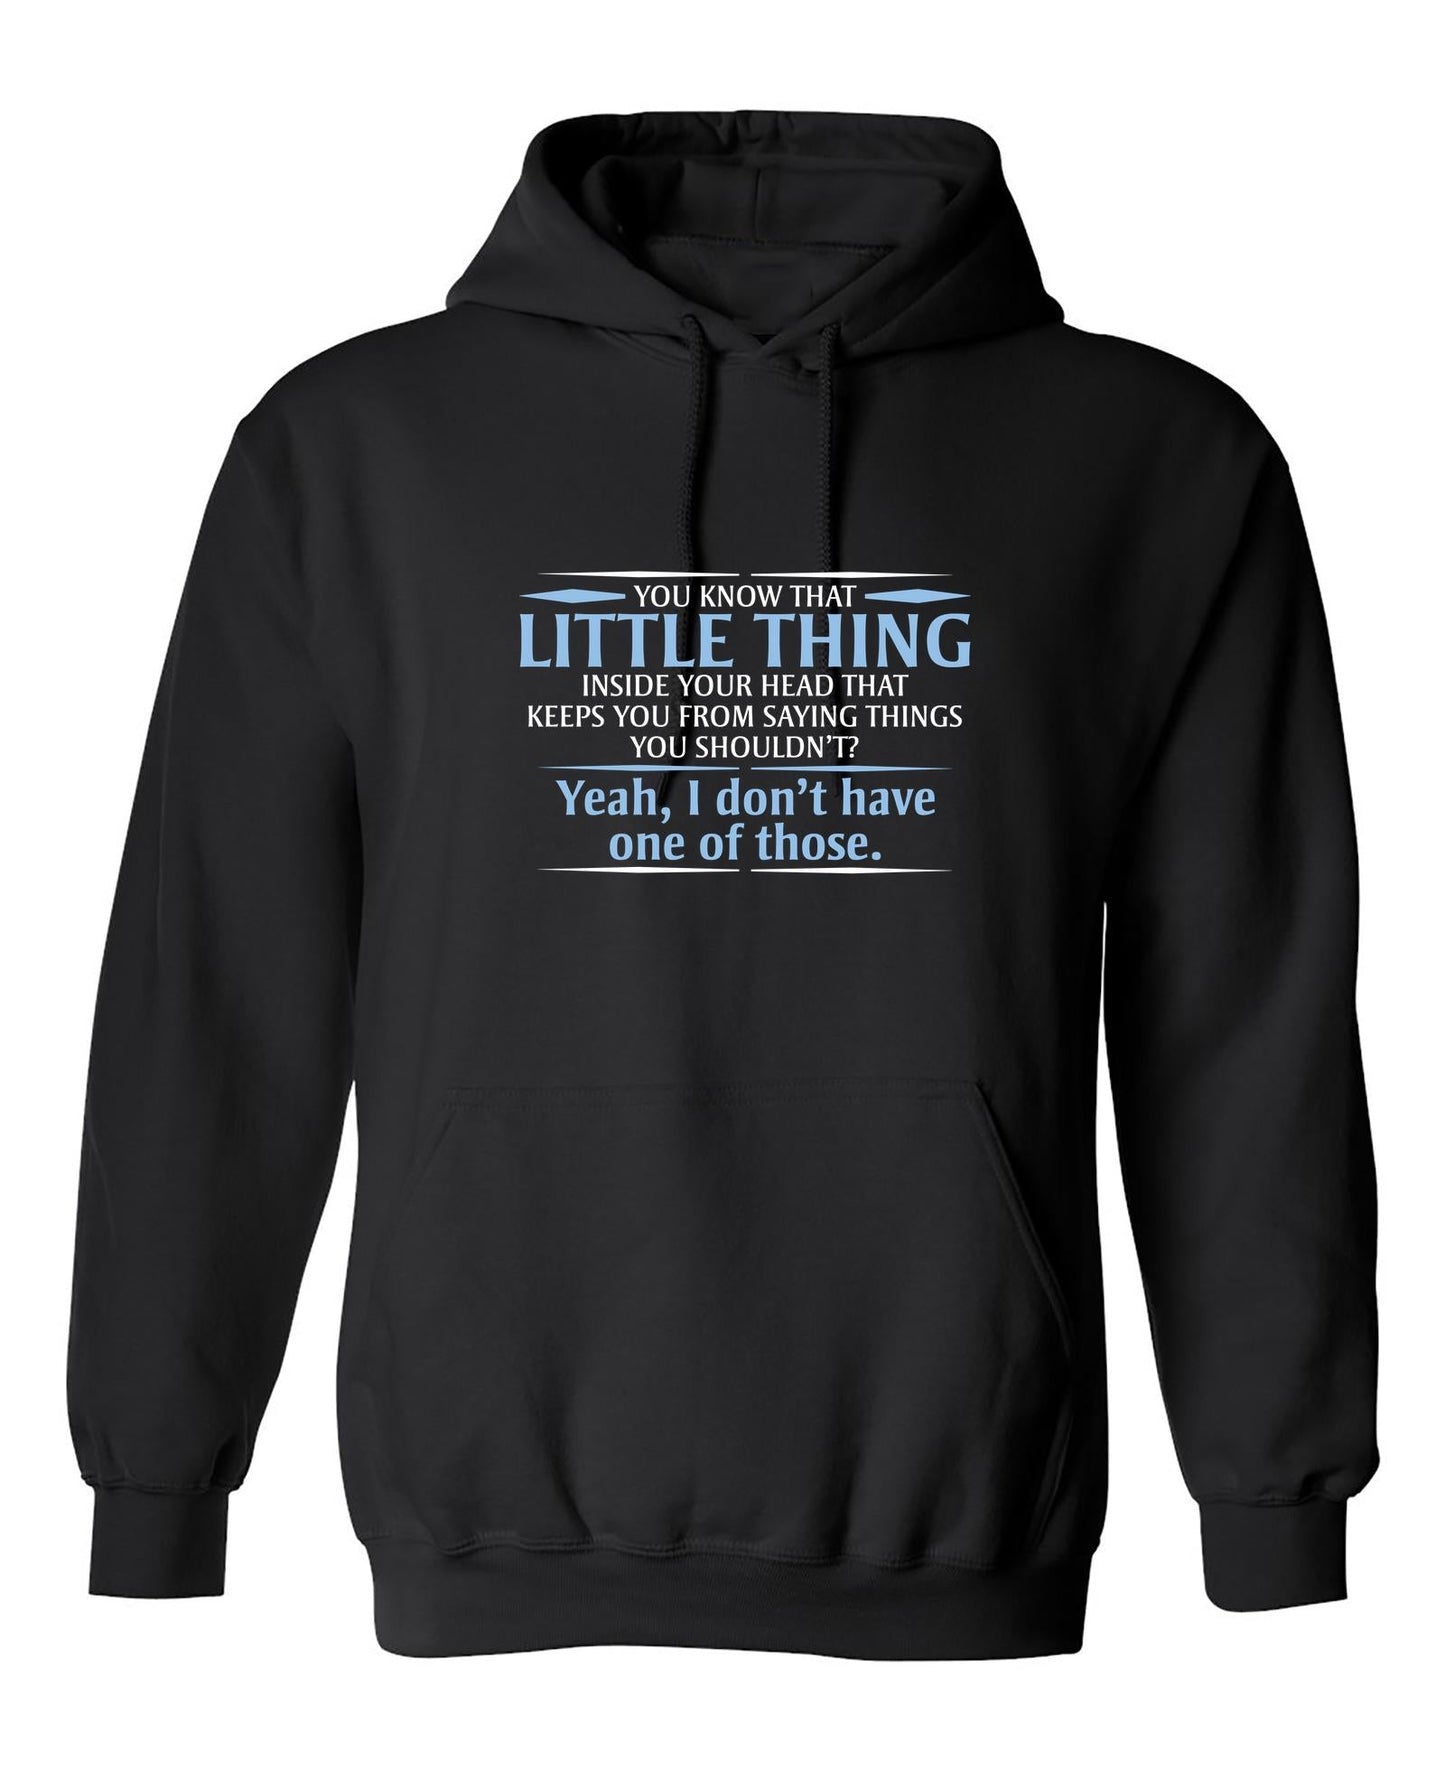 Funny T-Shirts design "You Know The Little Thing Inside Your Head That Keeps Saying Things You Shouldn't"